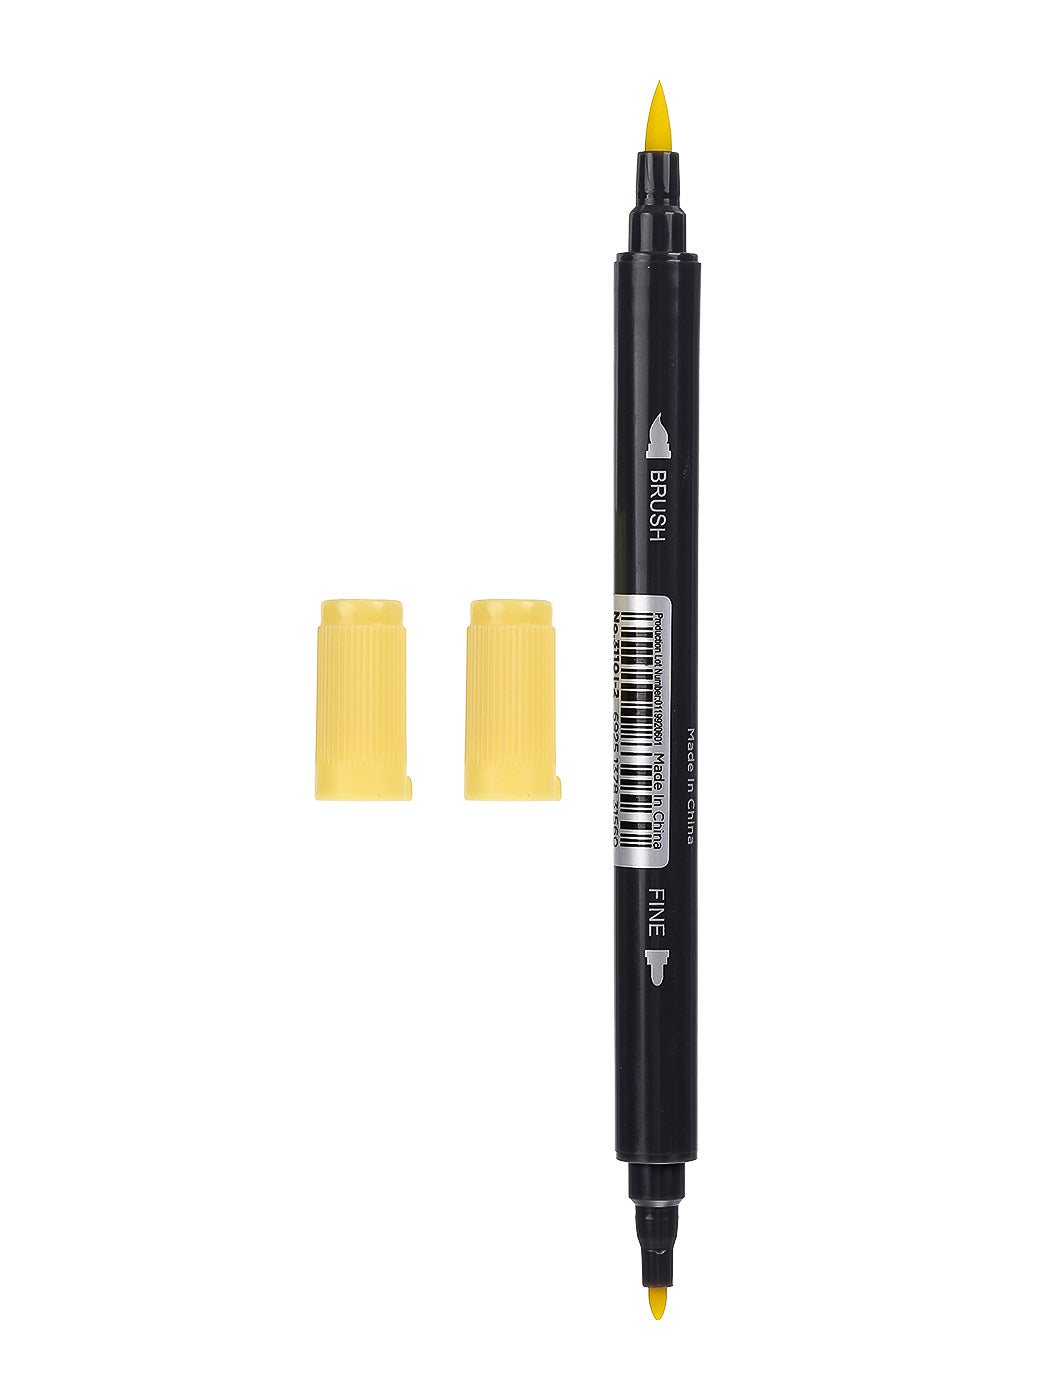 MINISO WATER SOLUBLE DOUBLE HEADED COLORED PEN (YELLOW) 0400012901 MARKER